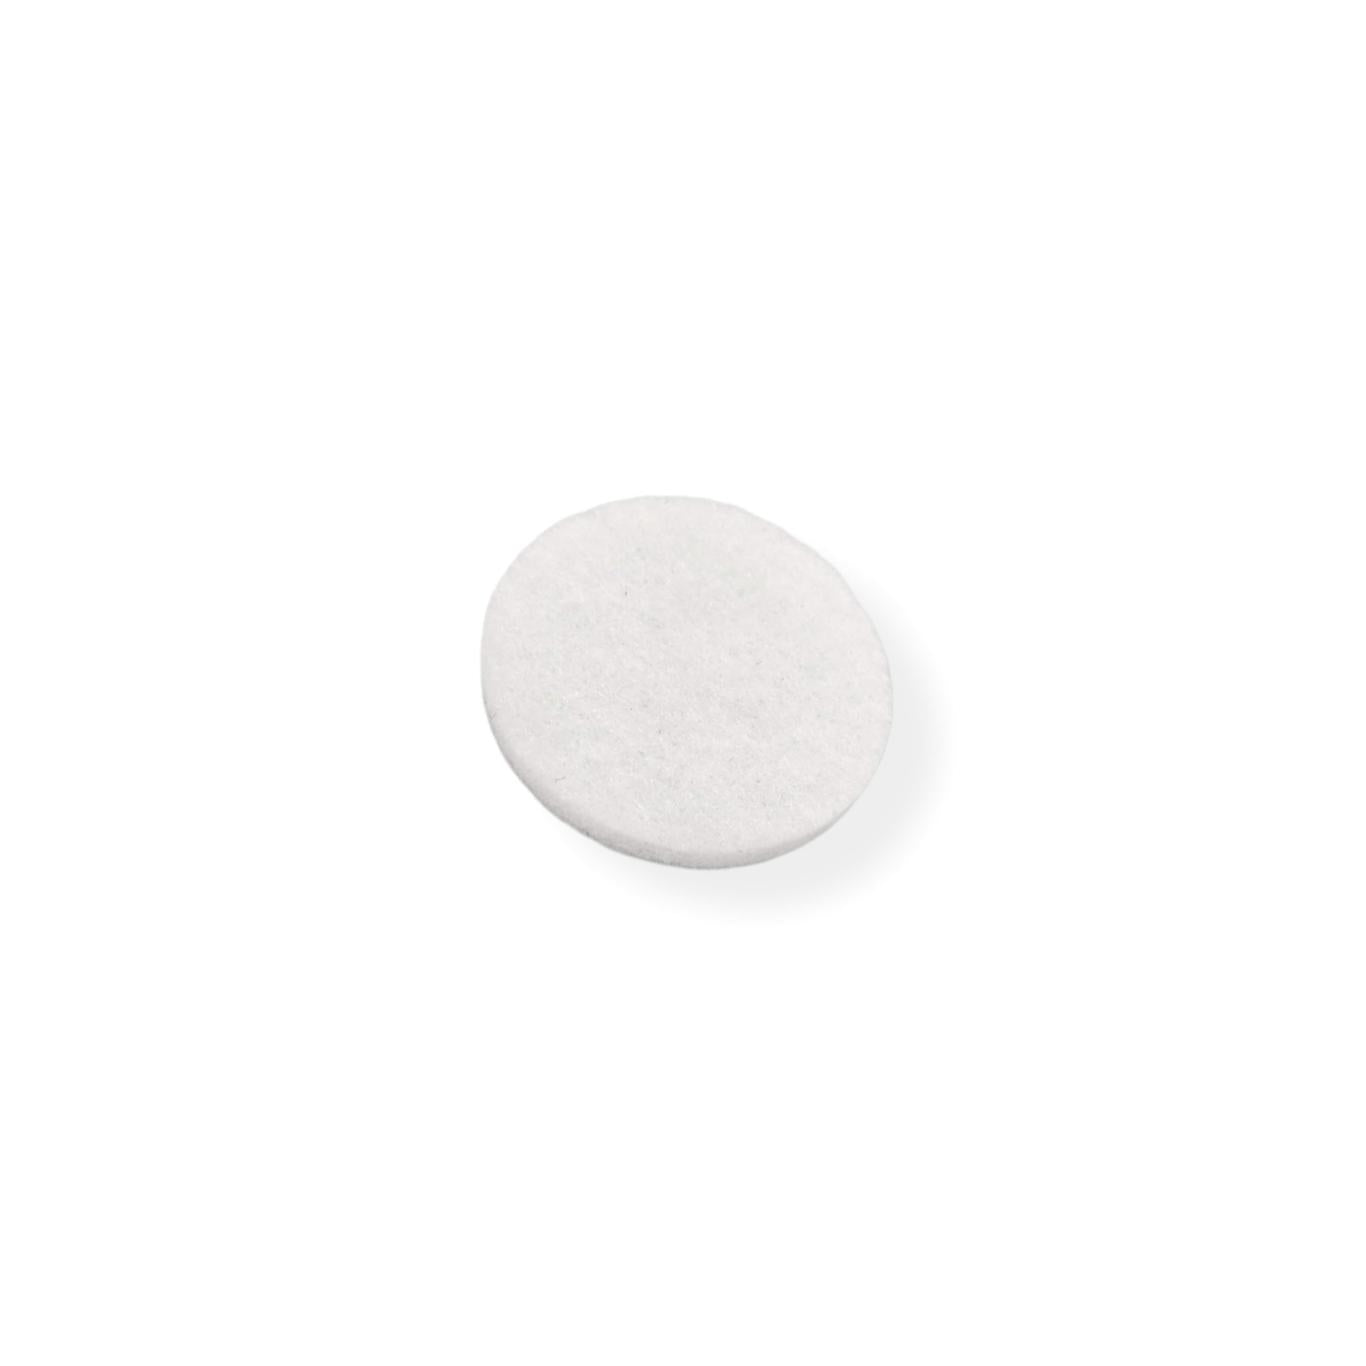 Felt Pads - White Self Adhesive Stick on Felt - Round 17mm Diameter - Made in Germany - Keay Vital Parts